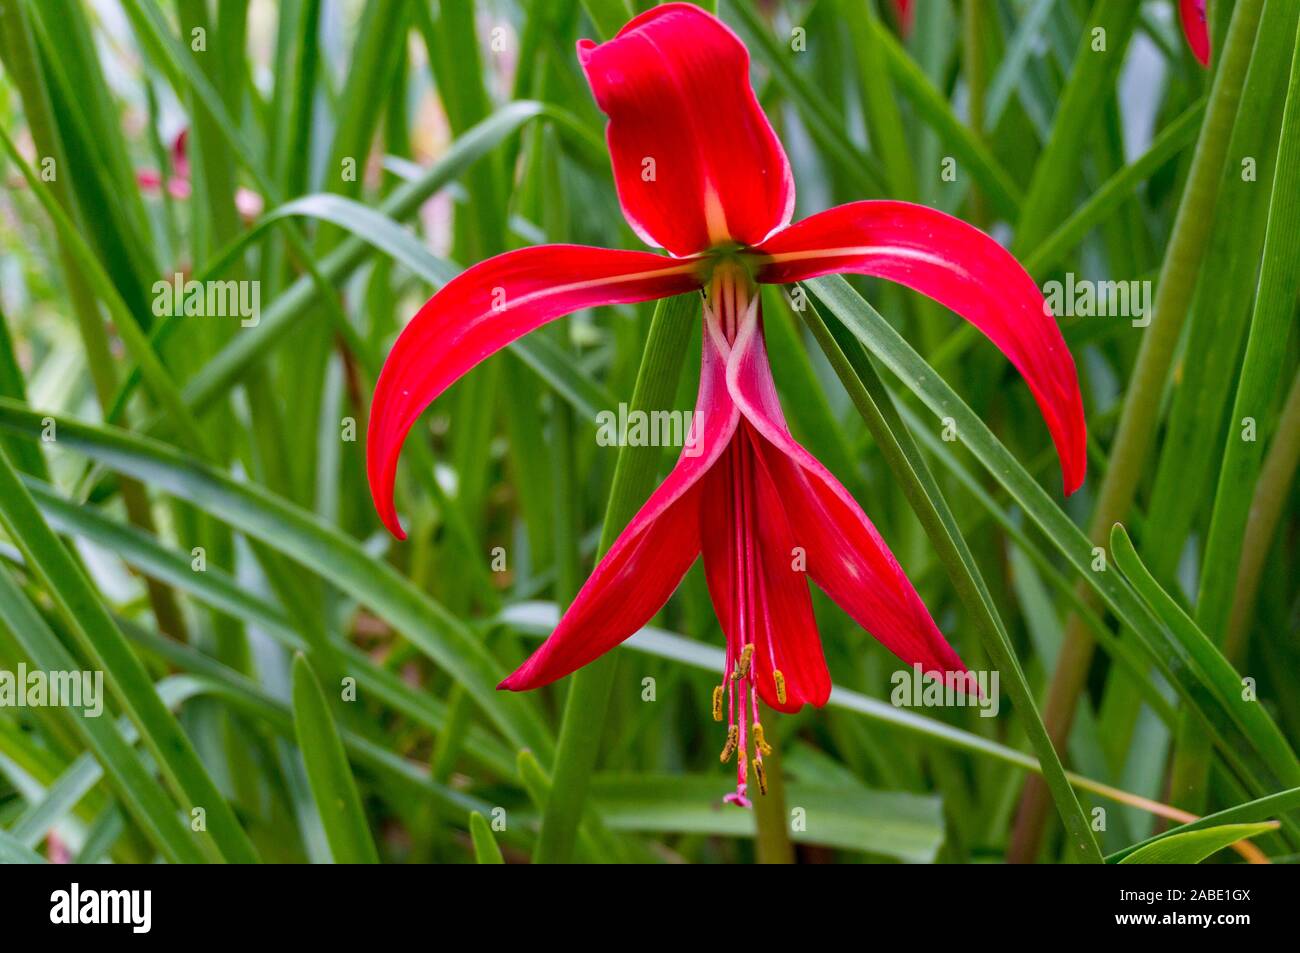 Jacobean lily, amaryllis flower in full bloom, nature background Stock Photo